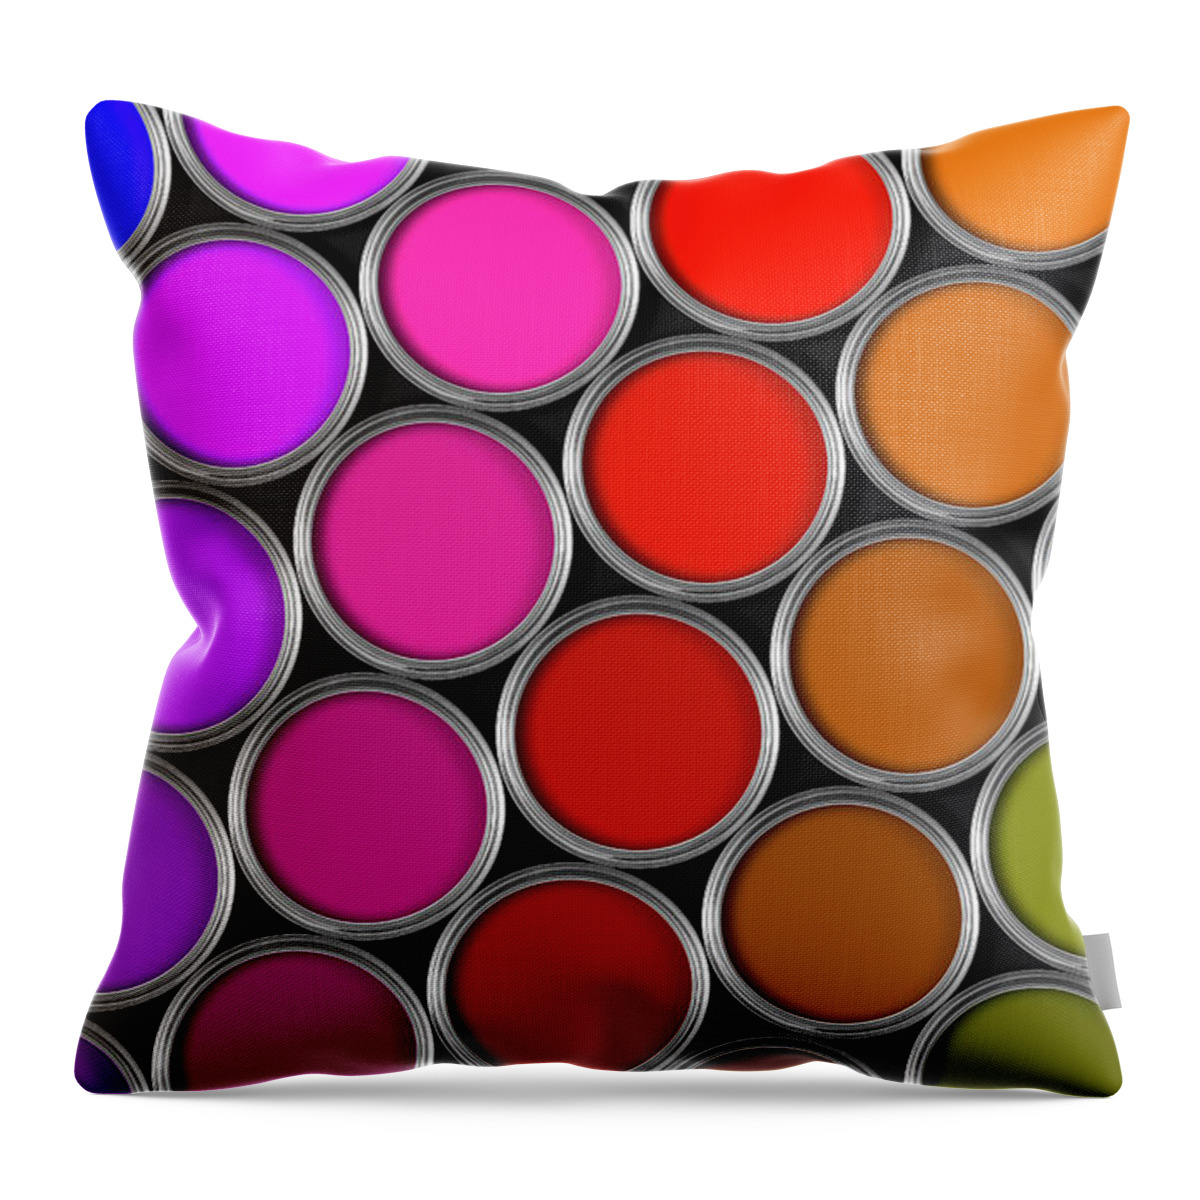 Artist Throw Pillow featuring the photograph Multi Colored Tins Of Paint On Black by Jallfree